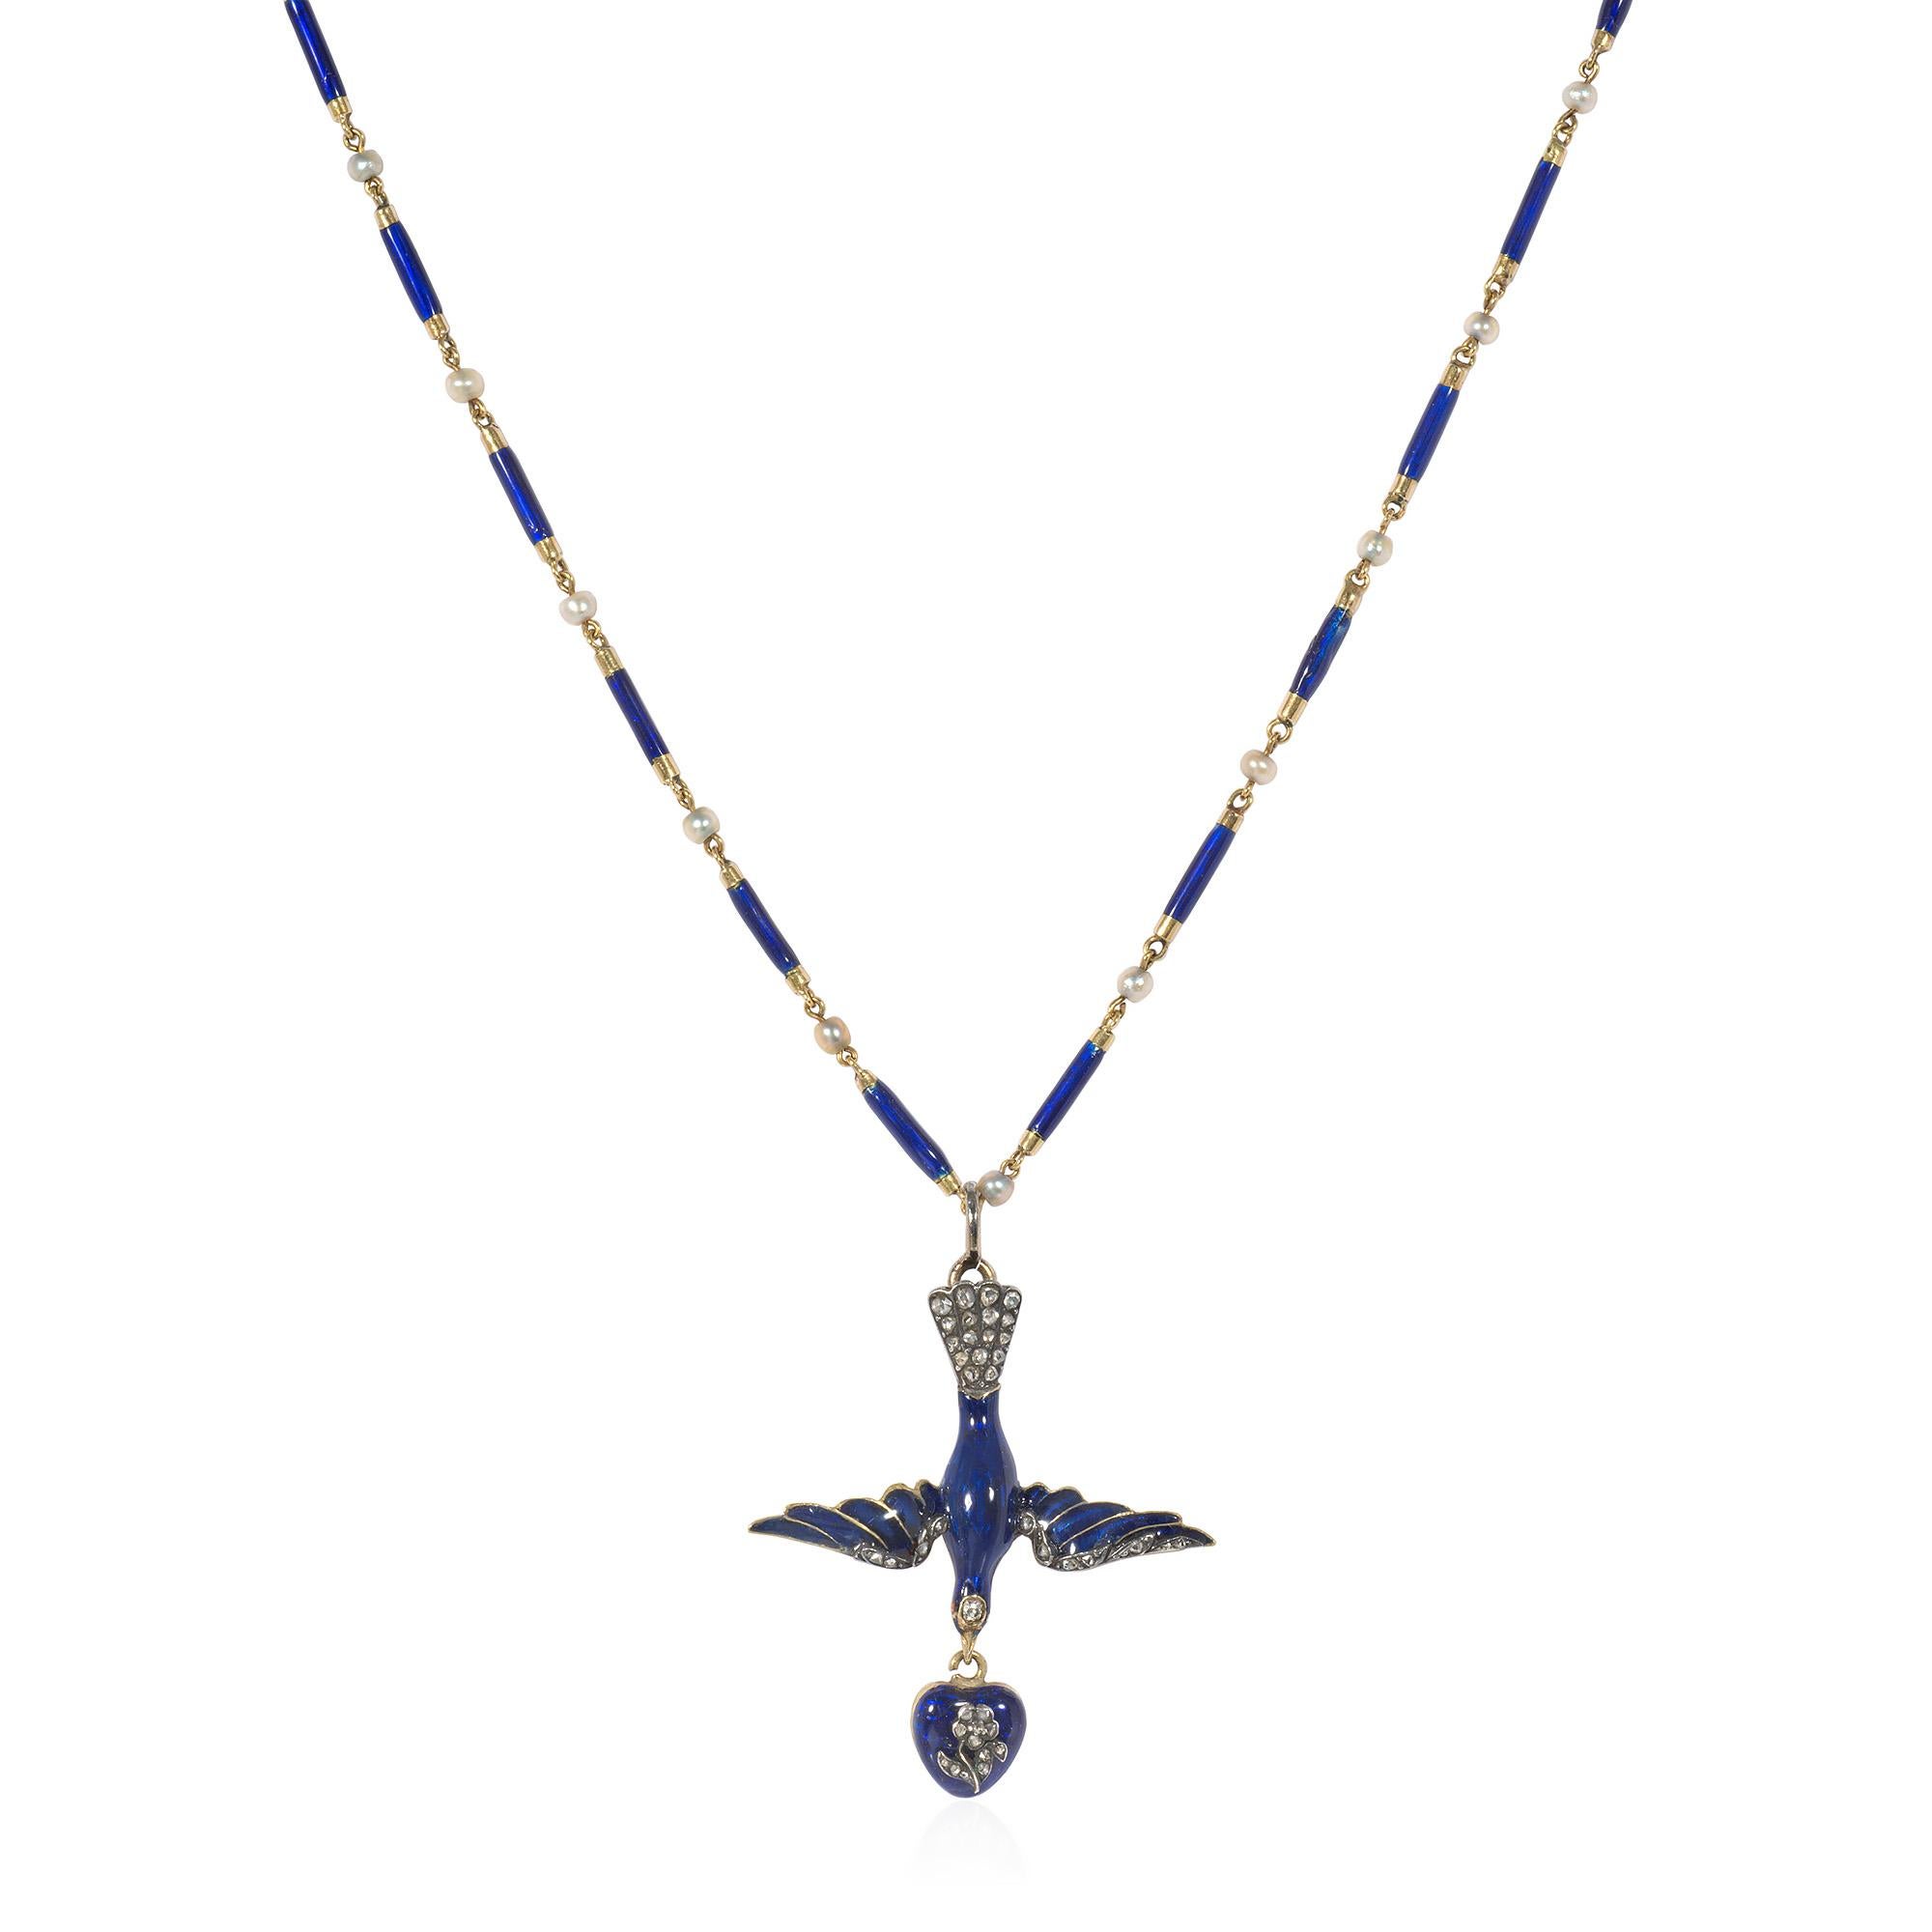 An antique early Victorian gold, enamel, diamond, and seed pearl necklace comprised of a gold and blue enamel baton link chain with seed pearl spacers, suspending a pendant in the form of a blue enameled bird with rose diamond embellishment on the